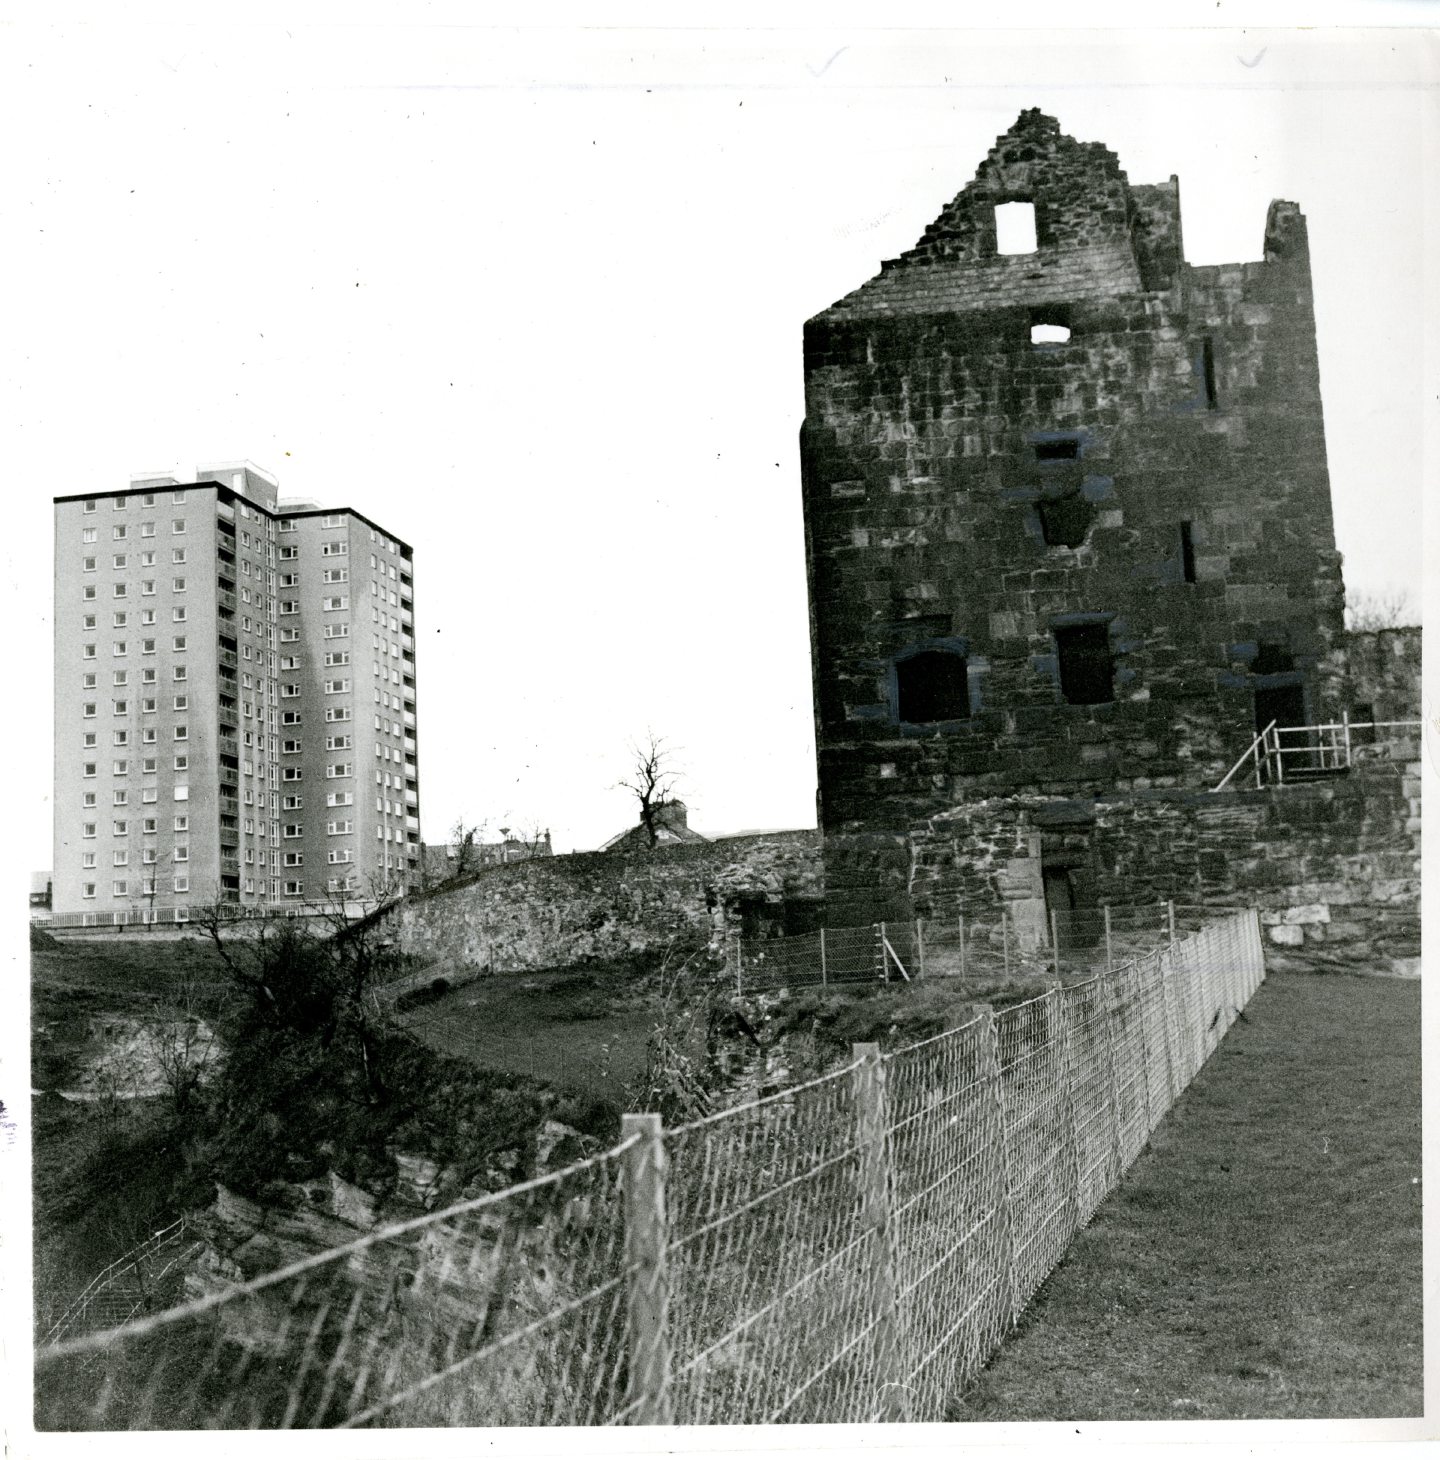 The ruined Ravenscraig Castle, Kirkcaldy, with the Ravenscraig multi-storey flats in the background in 1975.